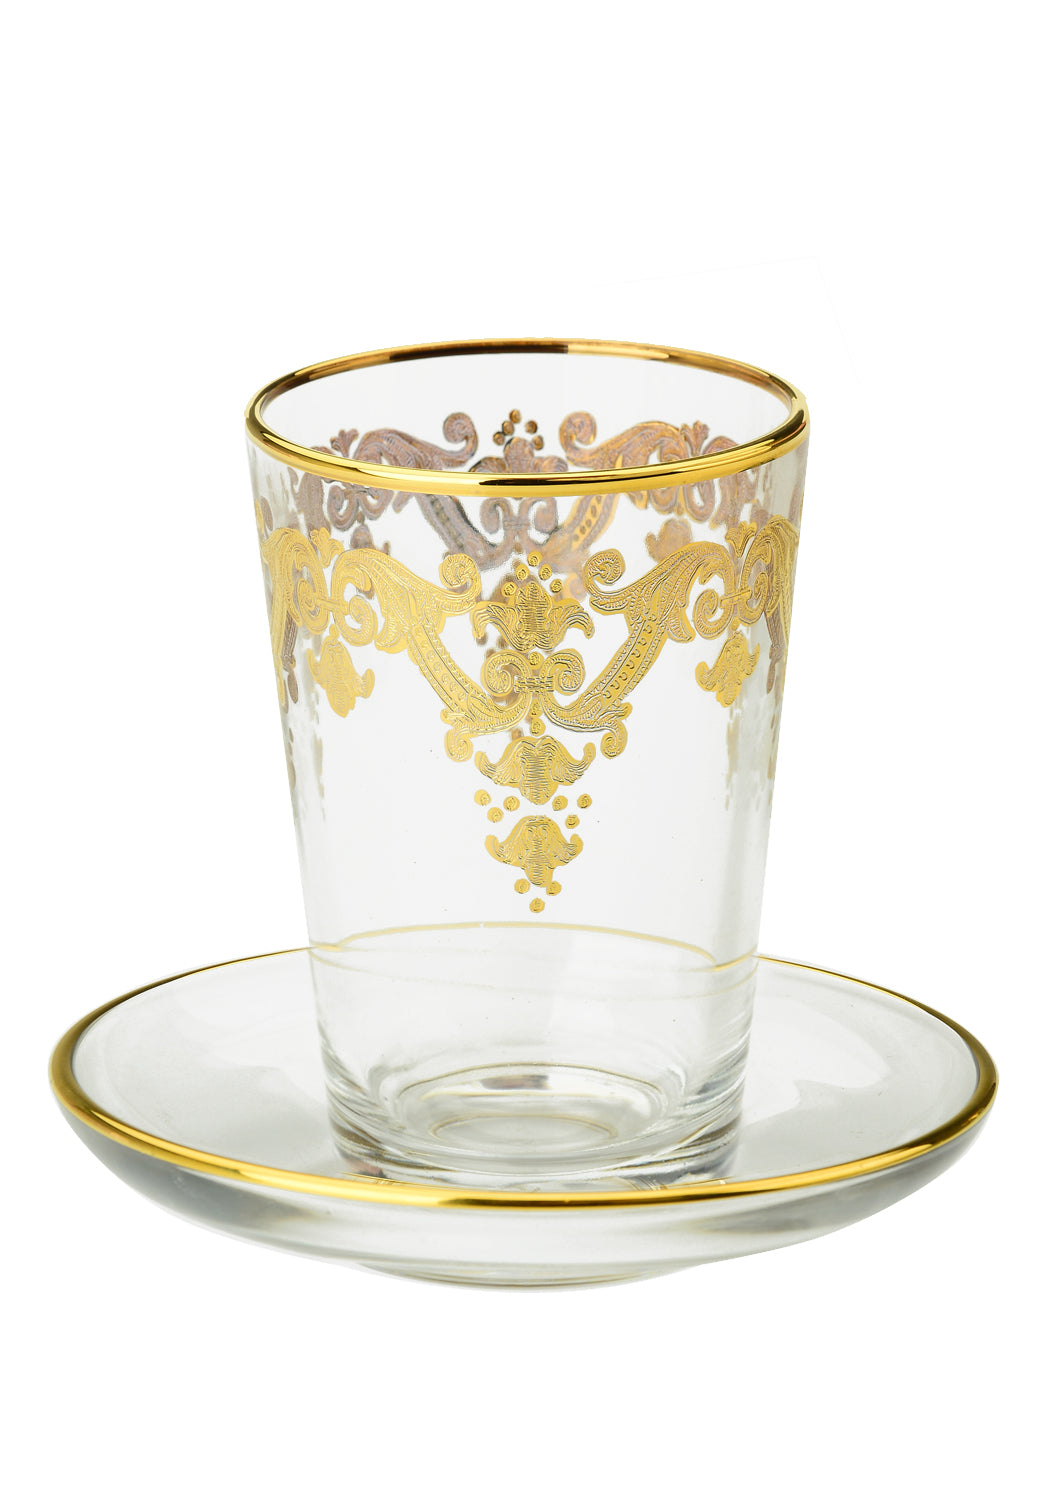 24k Gold Artwork Cups with Saucer Set of 6